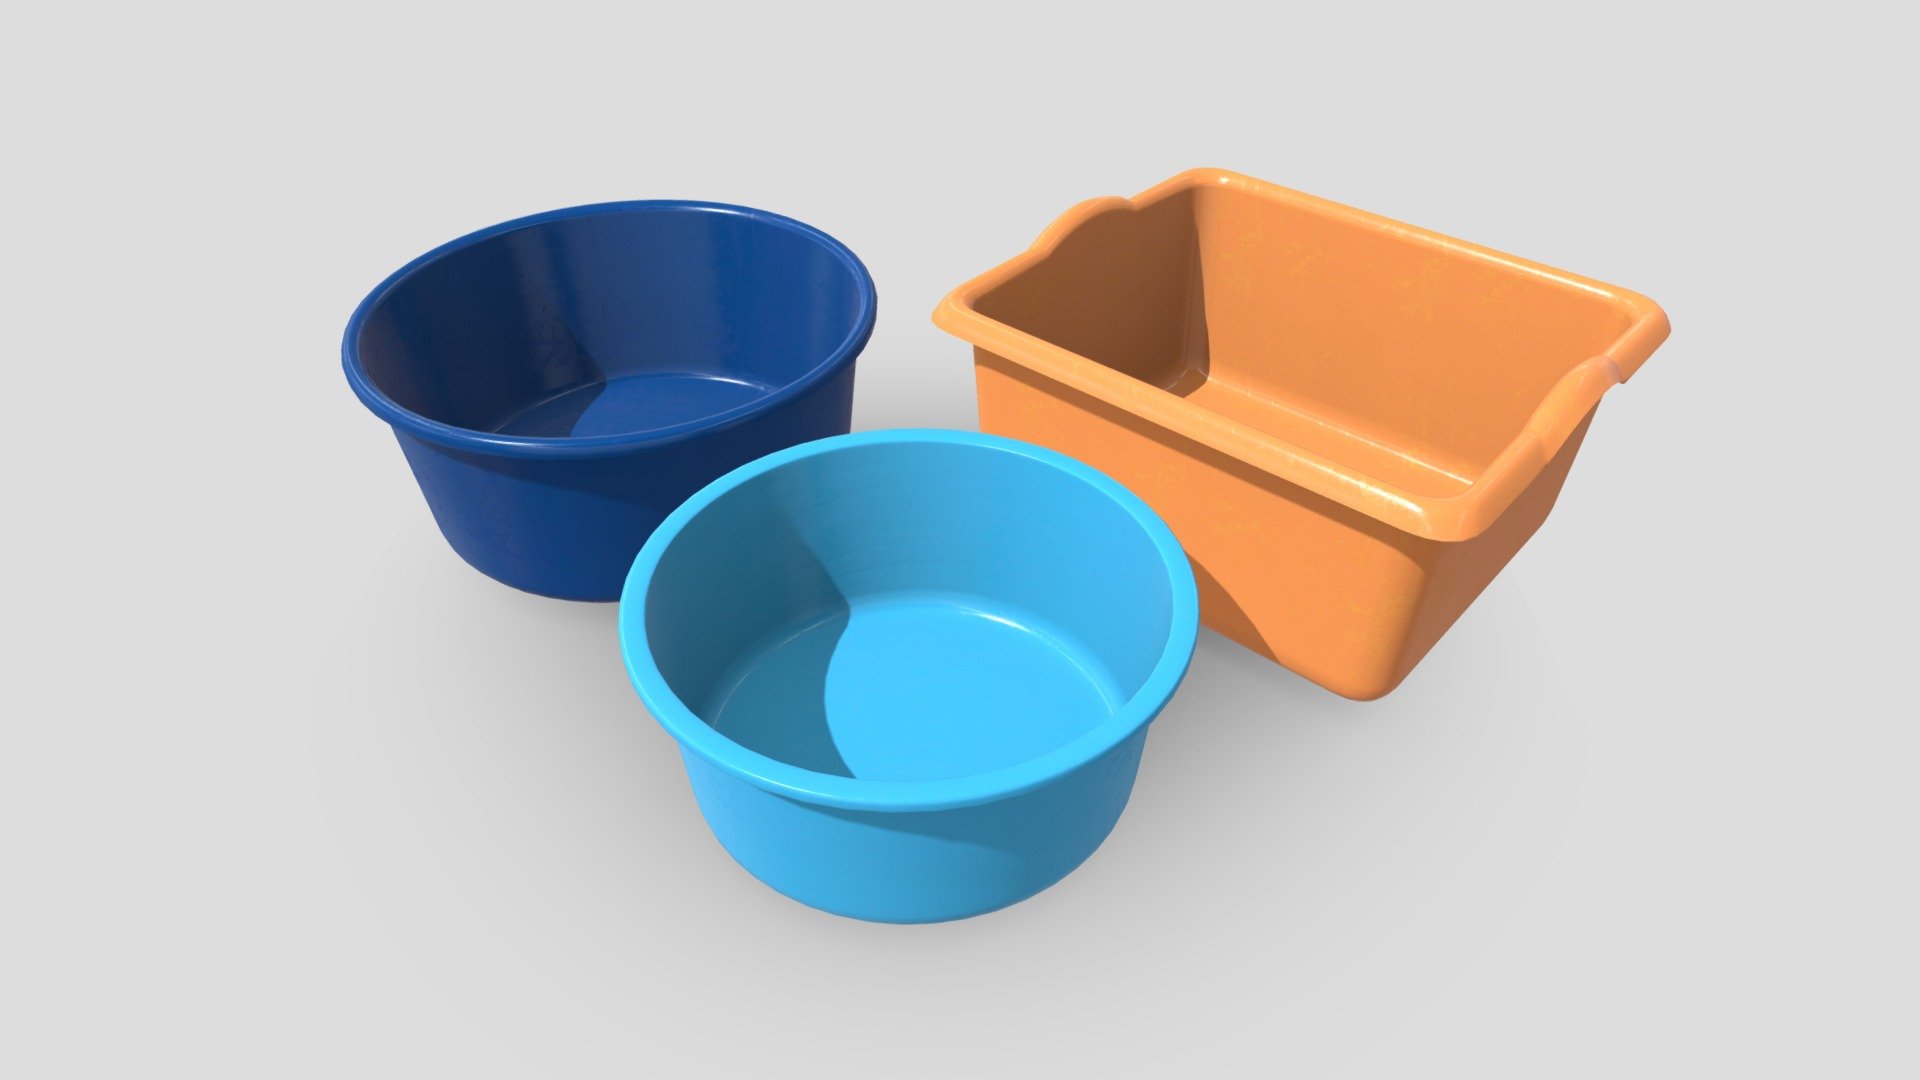 ‘Get your best basins with in colors counted!’

● 4096 x 4096 PBR textures

● normal map is baked from the high poly model

Please do not hesitate to contact with me. I will be happy to help you.

Contact: plaggy.net@gmail.com

Formats: .fbx, .dae, .max, .obj, .mtl, .png, .glTF, .USDZ Polygon: 4470 Vertices: 4476 Textures: Yes, PBR (ao, albedo, metal, normal, ORM, rough) Materials: Yes UV Mapped: Yes Unwrapped UVs: Yes (non overlapping) - Plastic Wash Basin Pack - Buy Royalty Free 3D model by plaggy 3d model